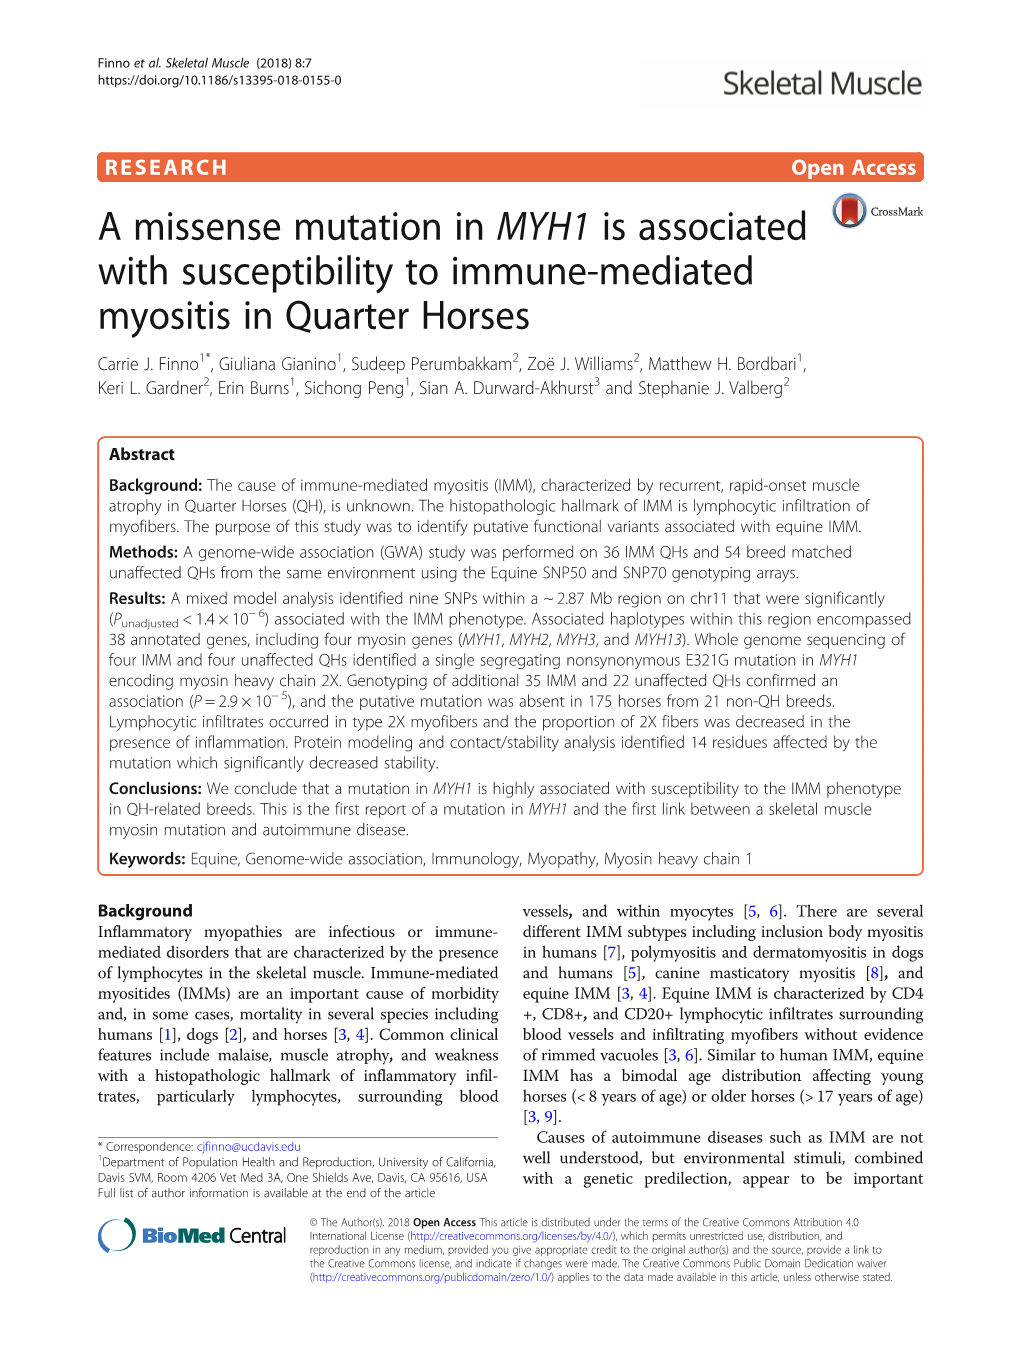 A Missense Mutation in MYH1 Is Associated with Susceptibility to Immune-Mediated Myositis in Quarter Horses Carrie J